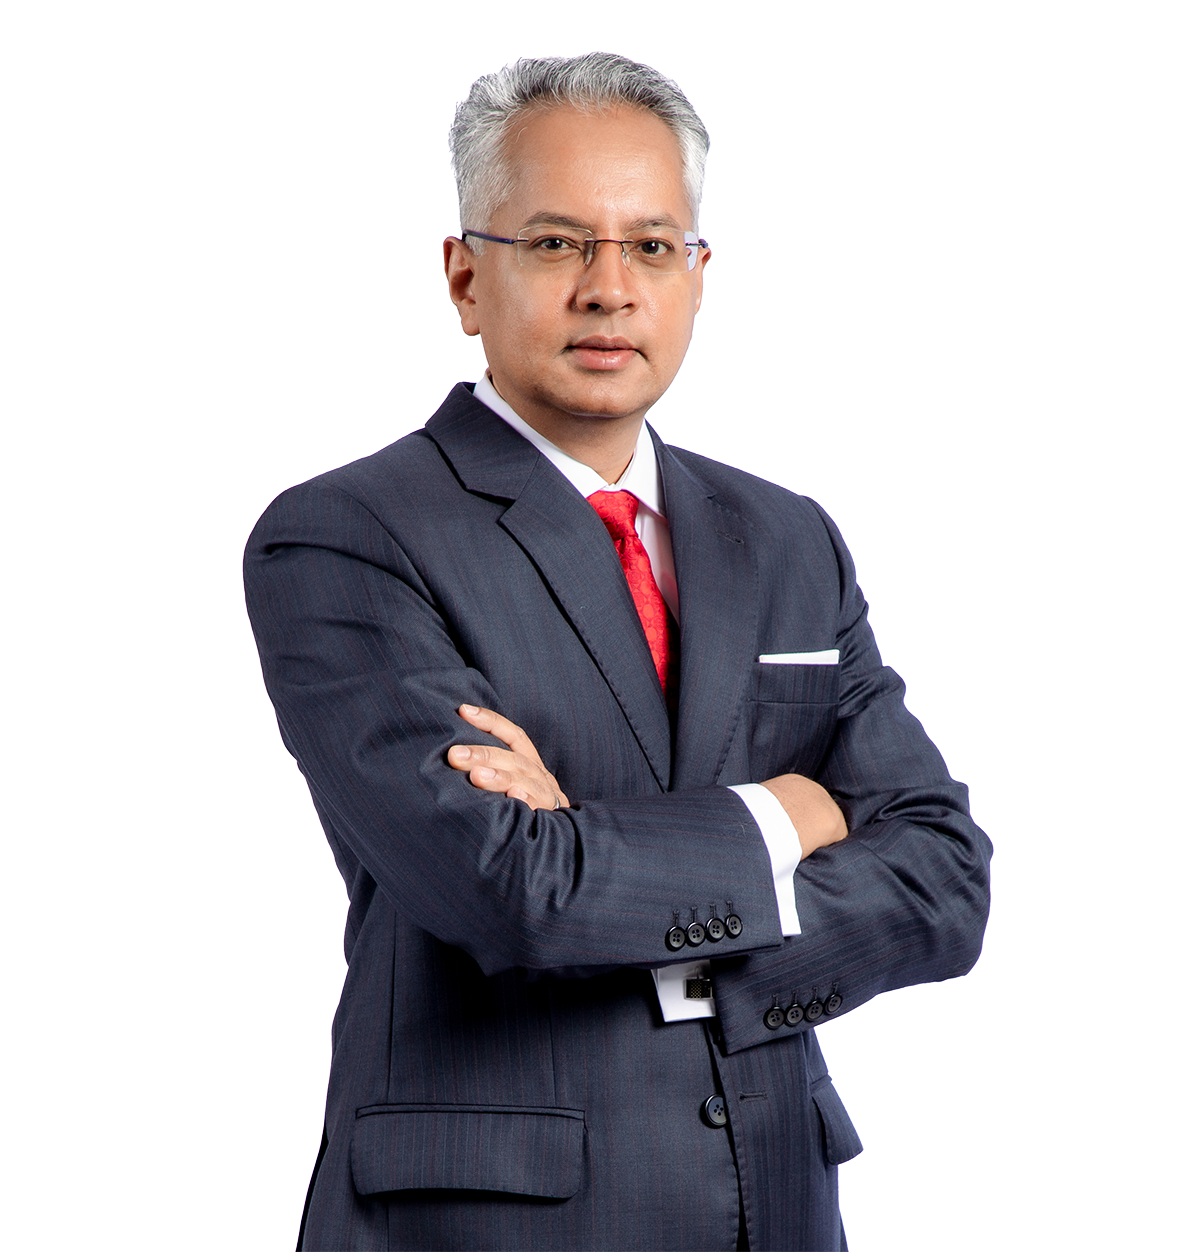 Sime Darby Property’s Group Managing Director, Dato’ Azmir Merican said with its strategic location and extensive acreage, the proposed development will offer attractive opportunities for businesses and drive economic growth.